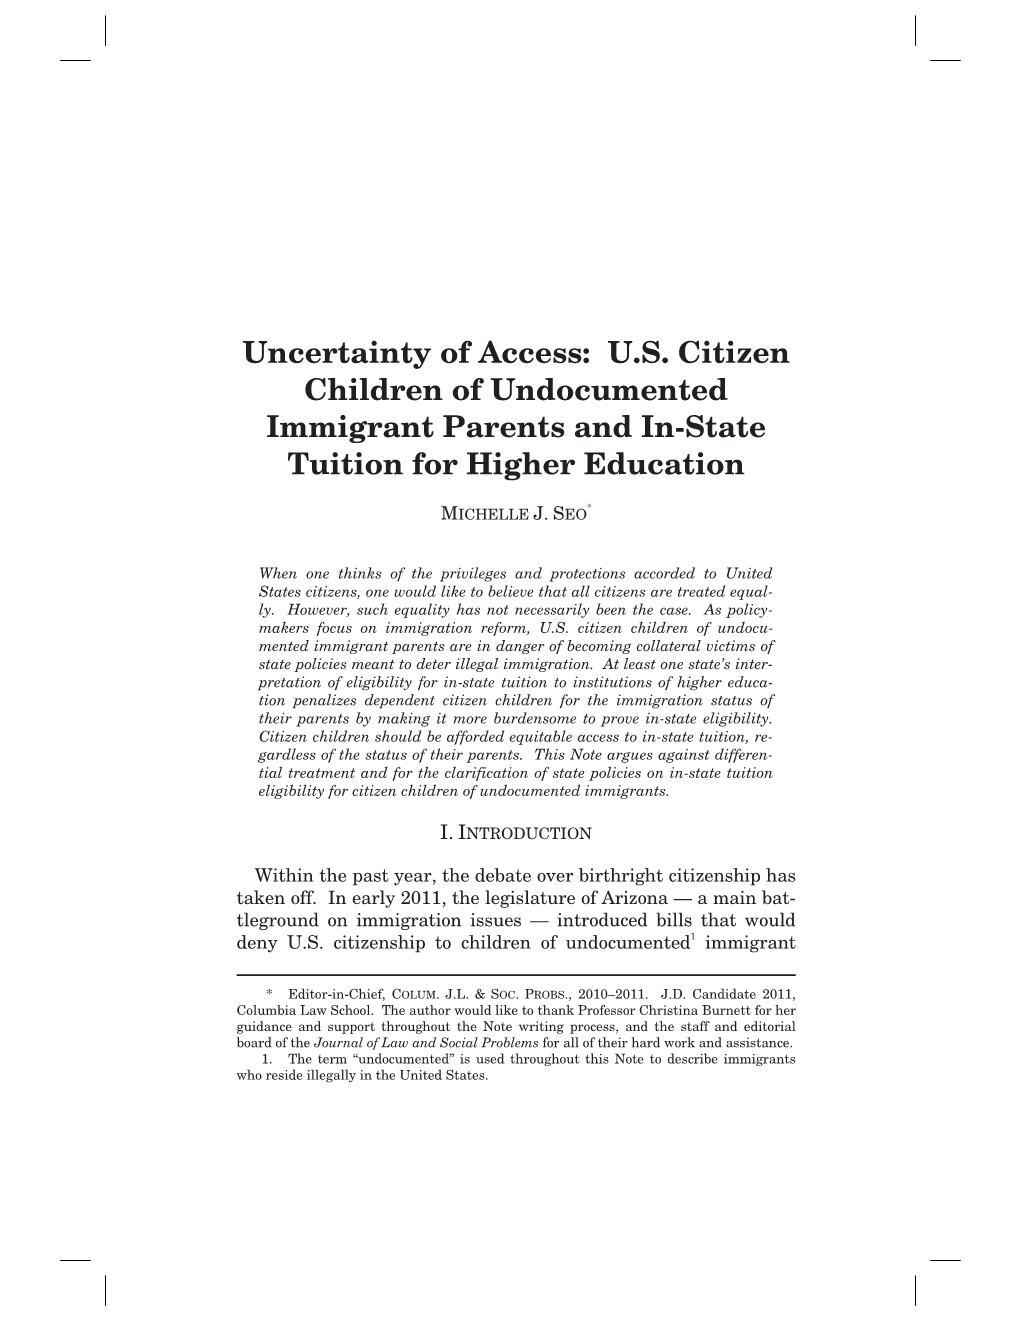 U.S. Citizen Children of Undocumented Immigrant Parents and In-State Tuition for Higher Education